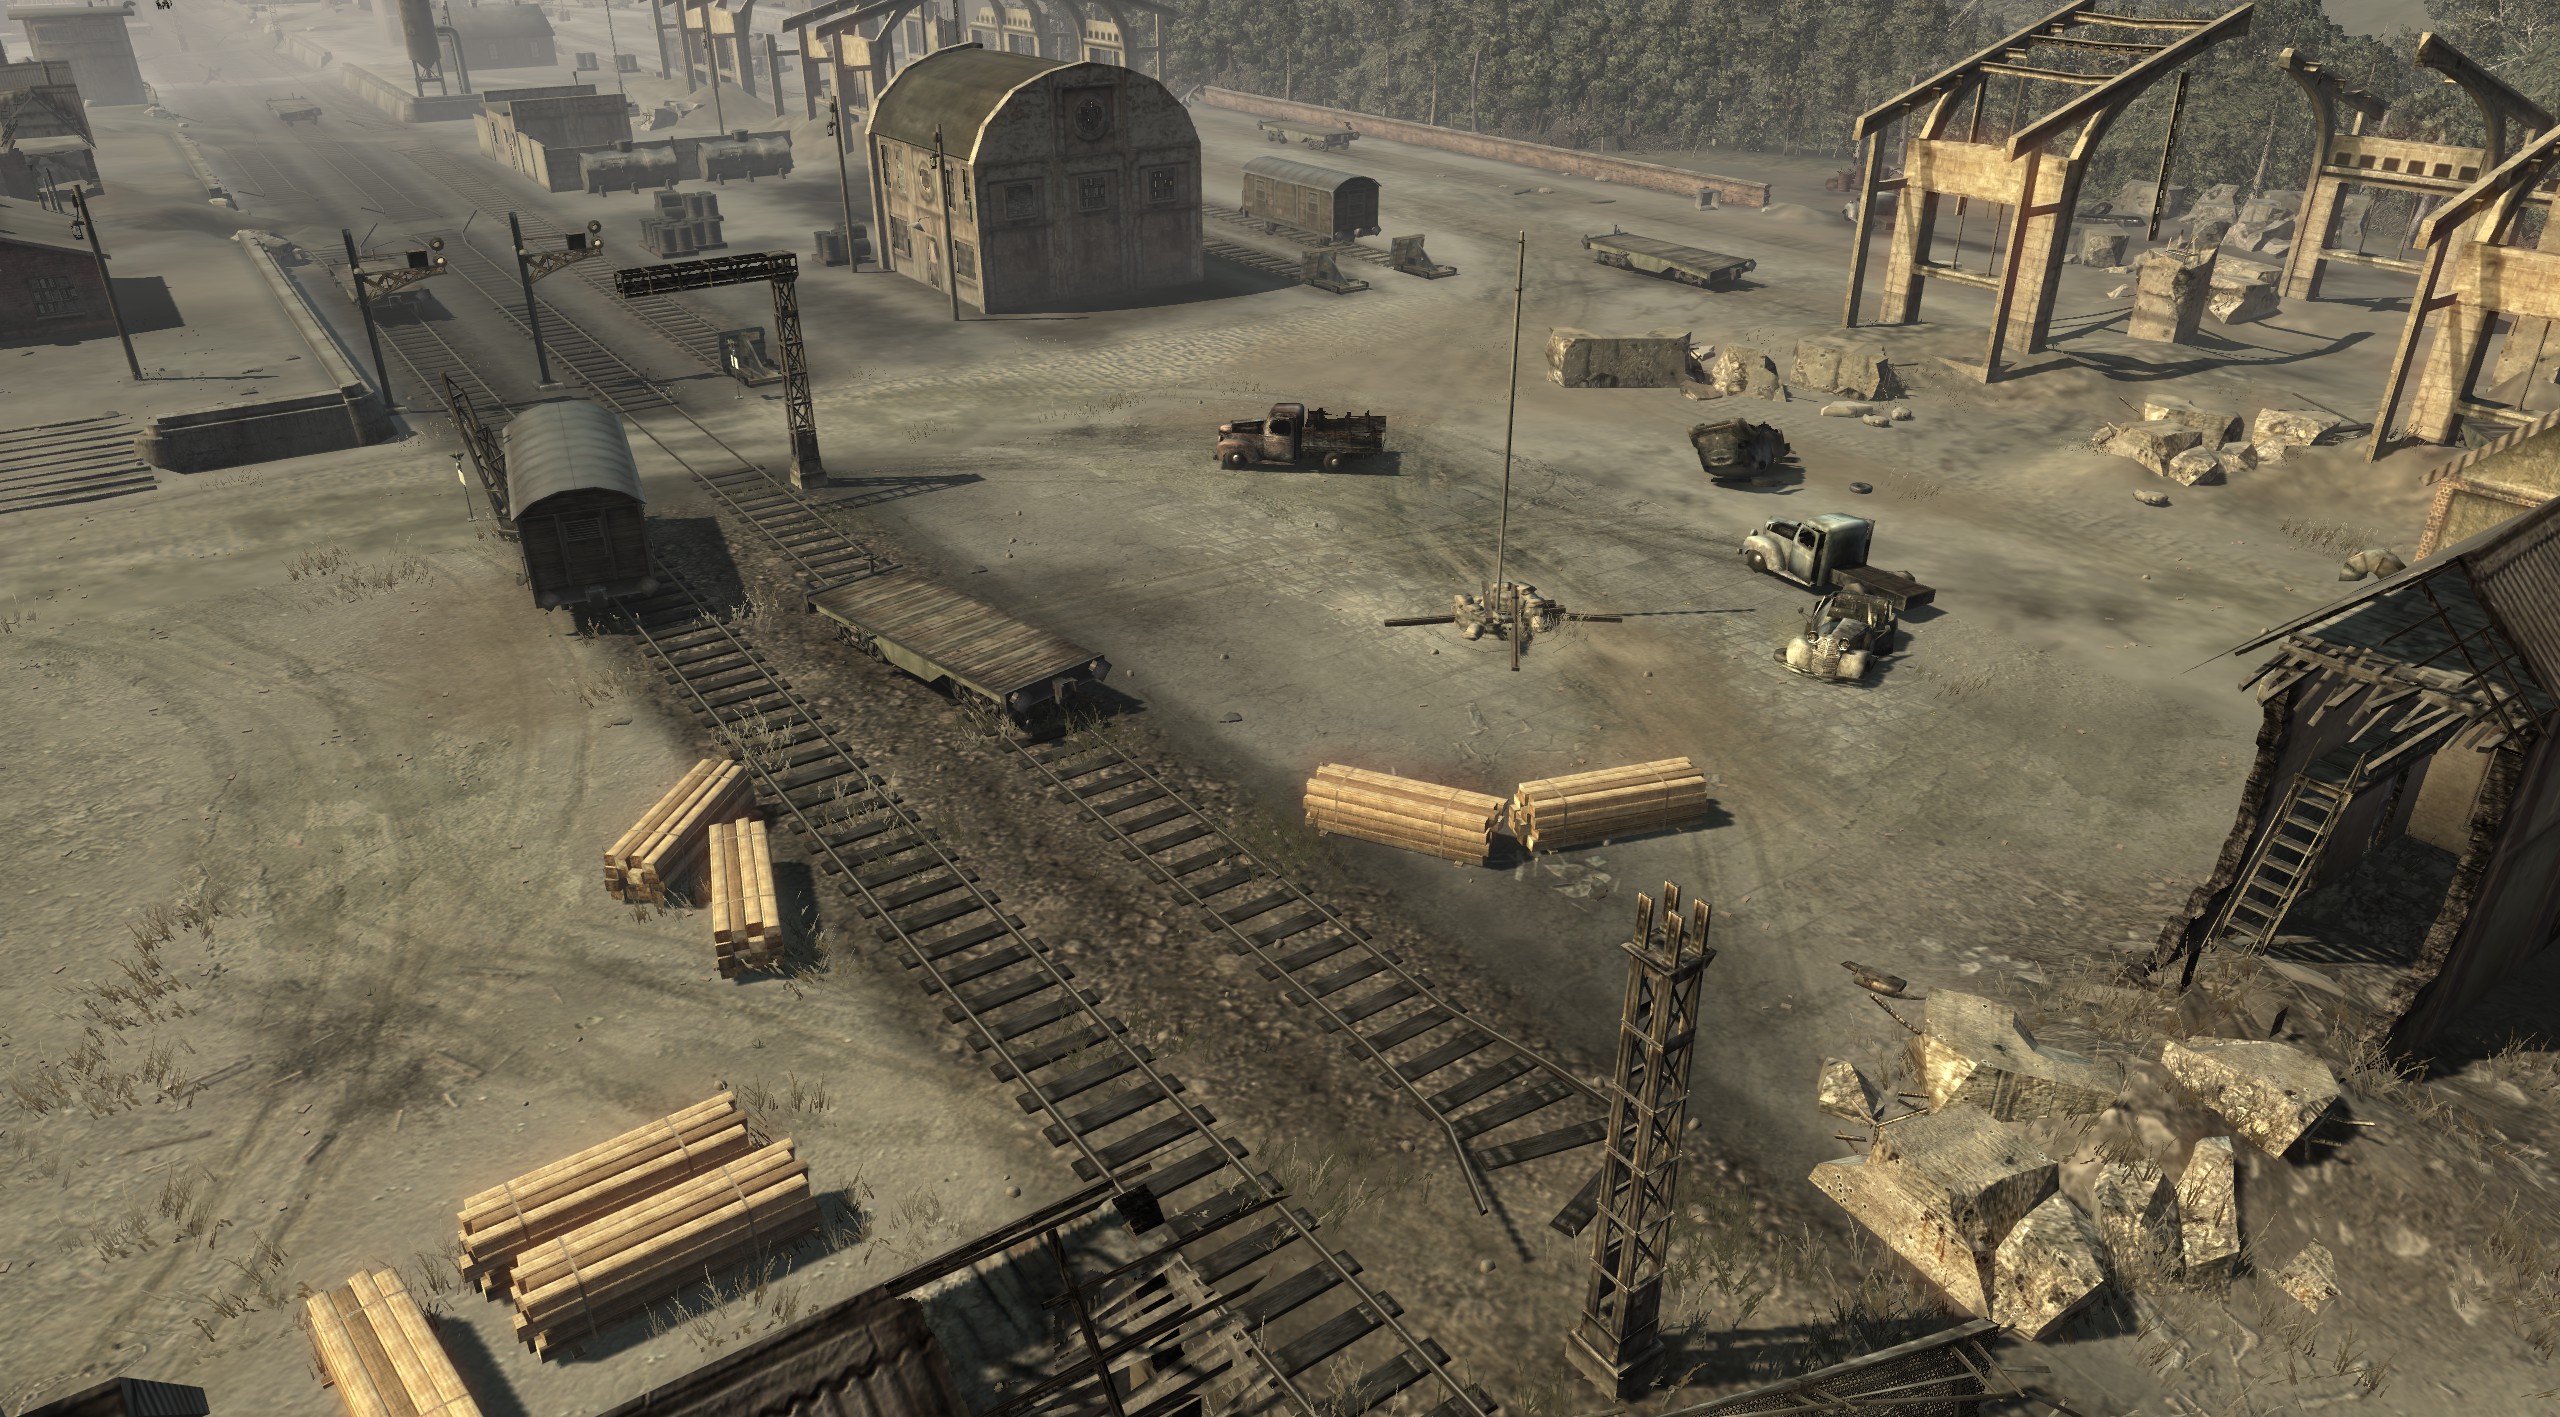 The eastern island was themed around a railyard.  Note the massiv skeleton of a structure in the background suggesting large warehouses at one point.